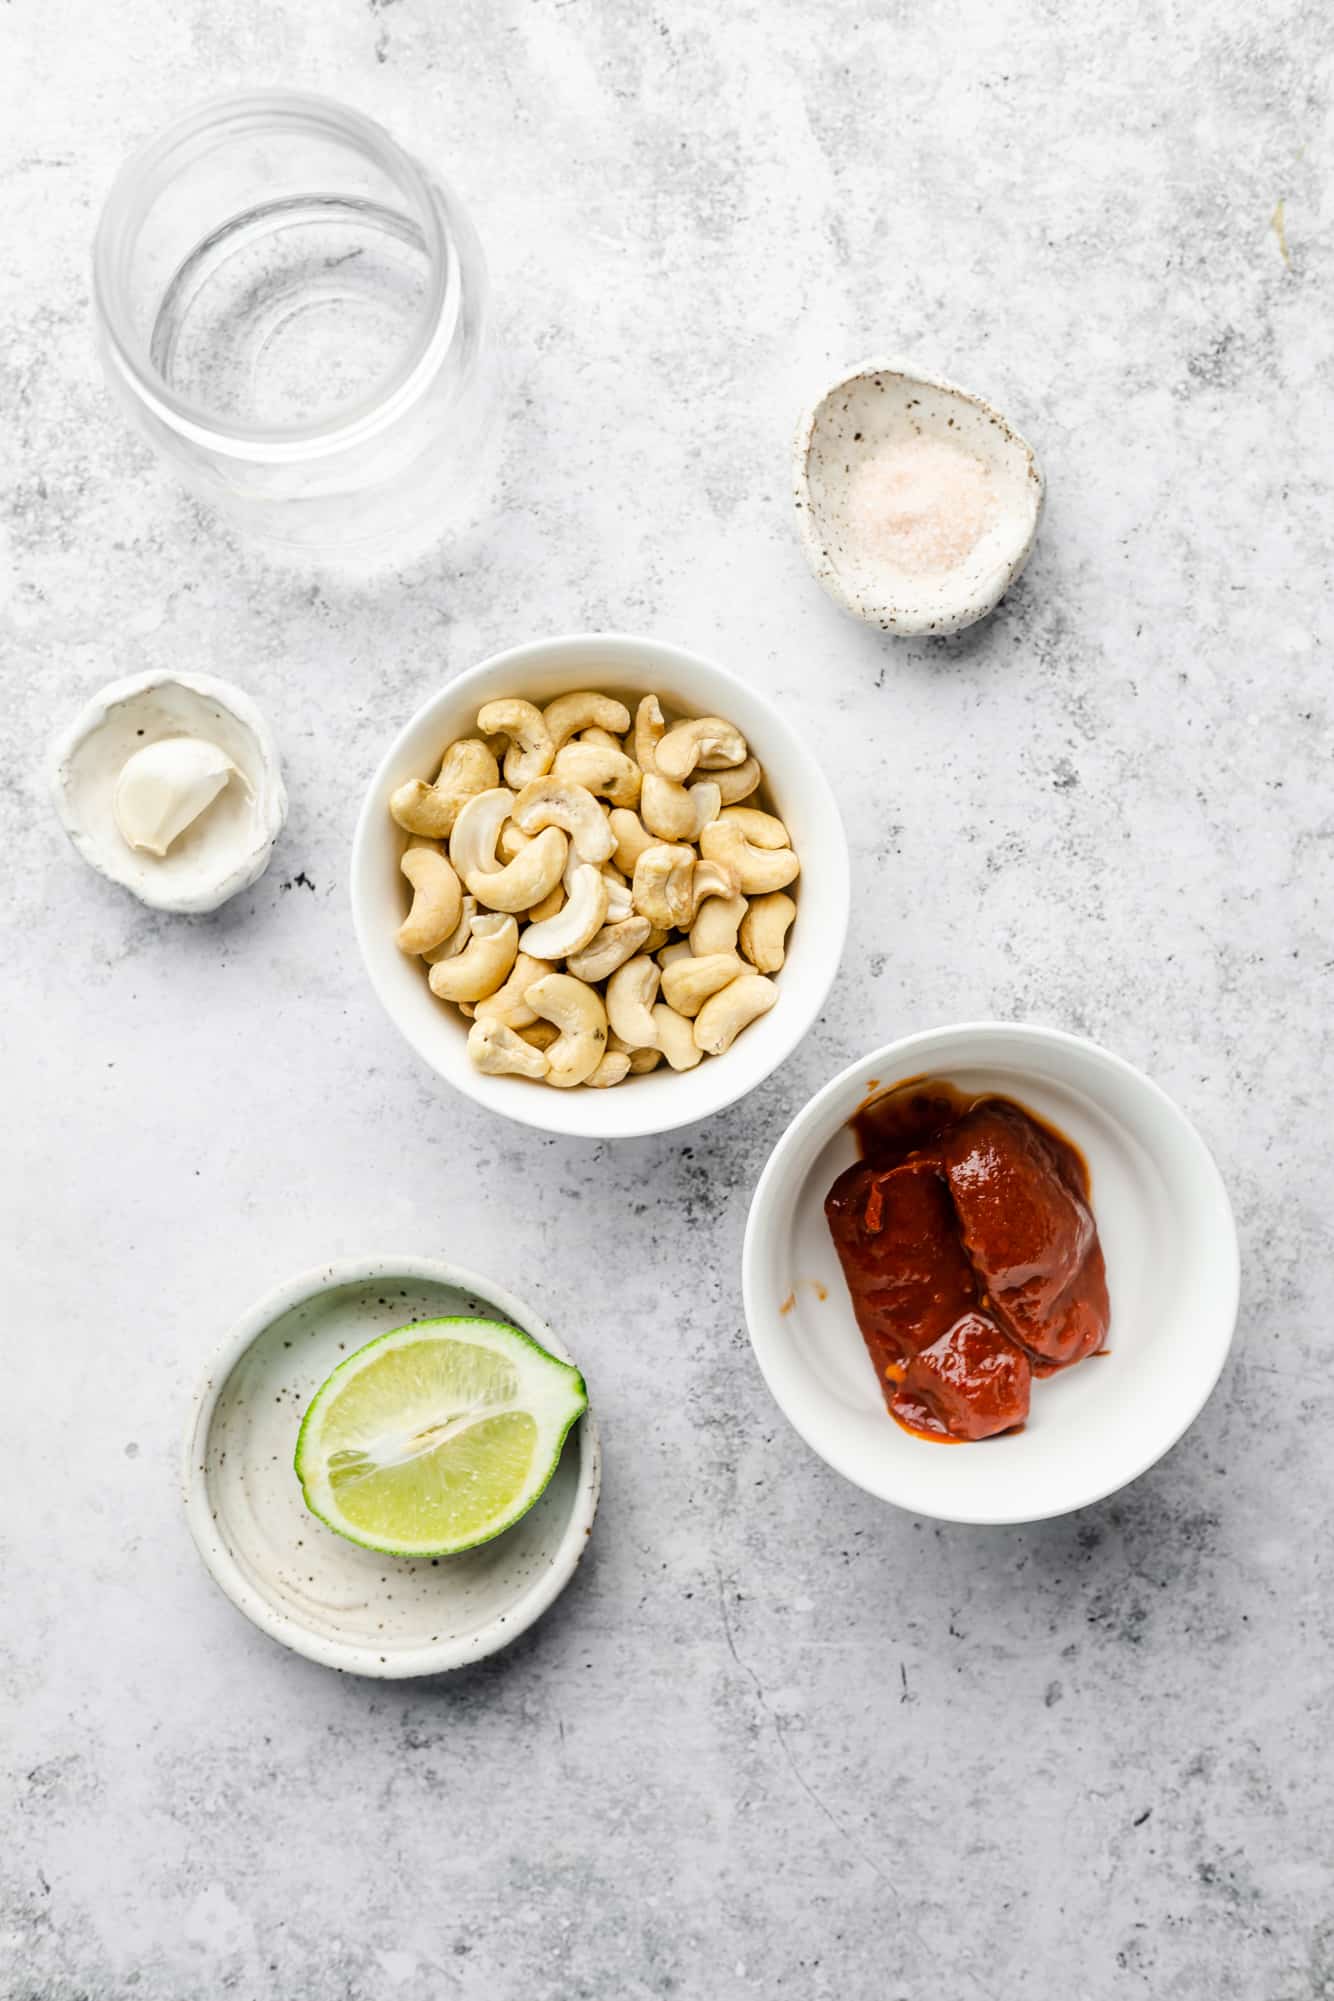 Ingredients for chipotle sauce in separate bowls and glasses.